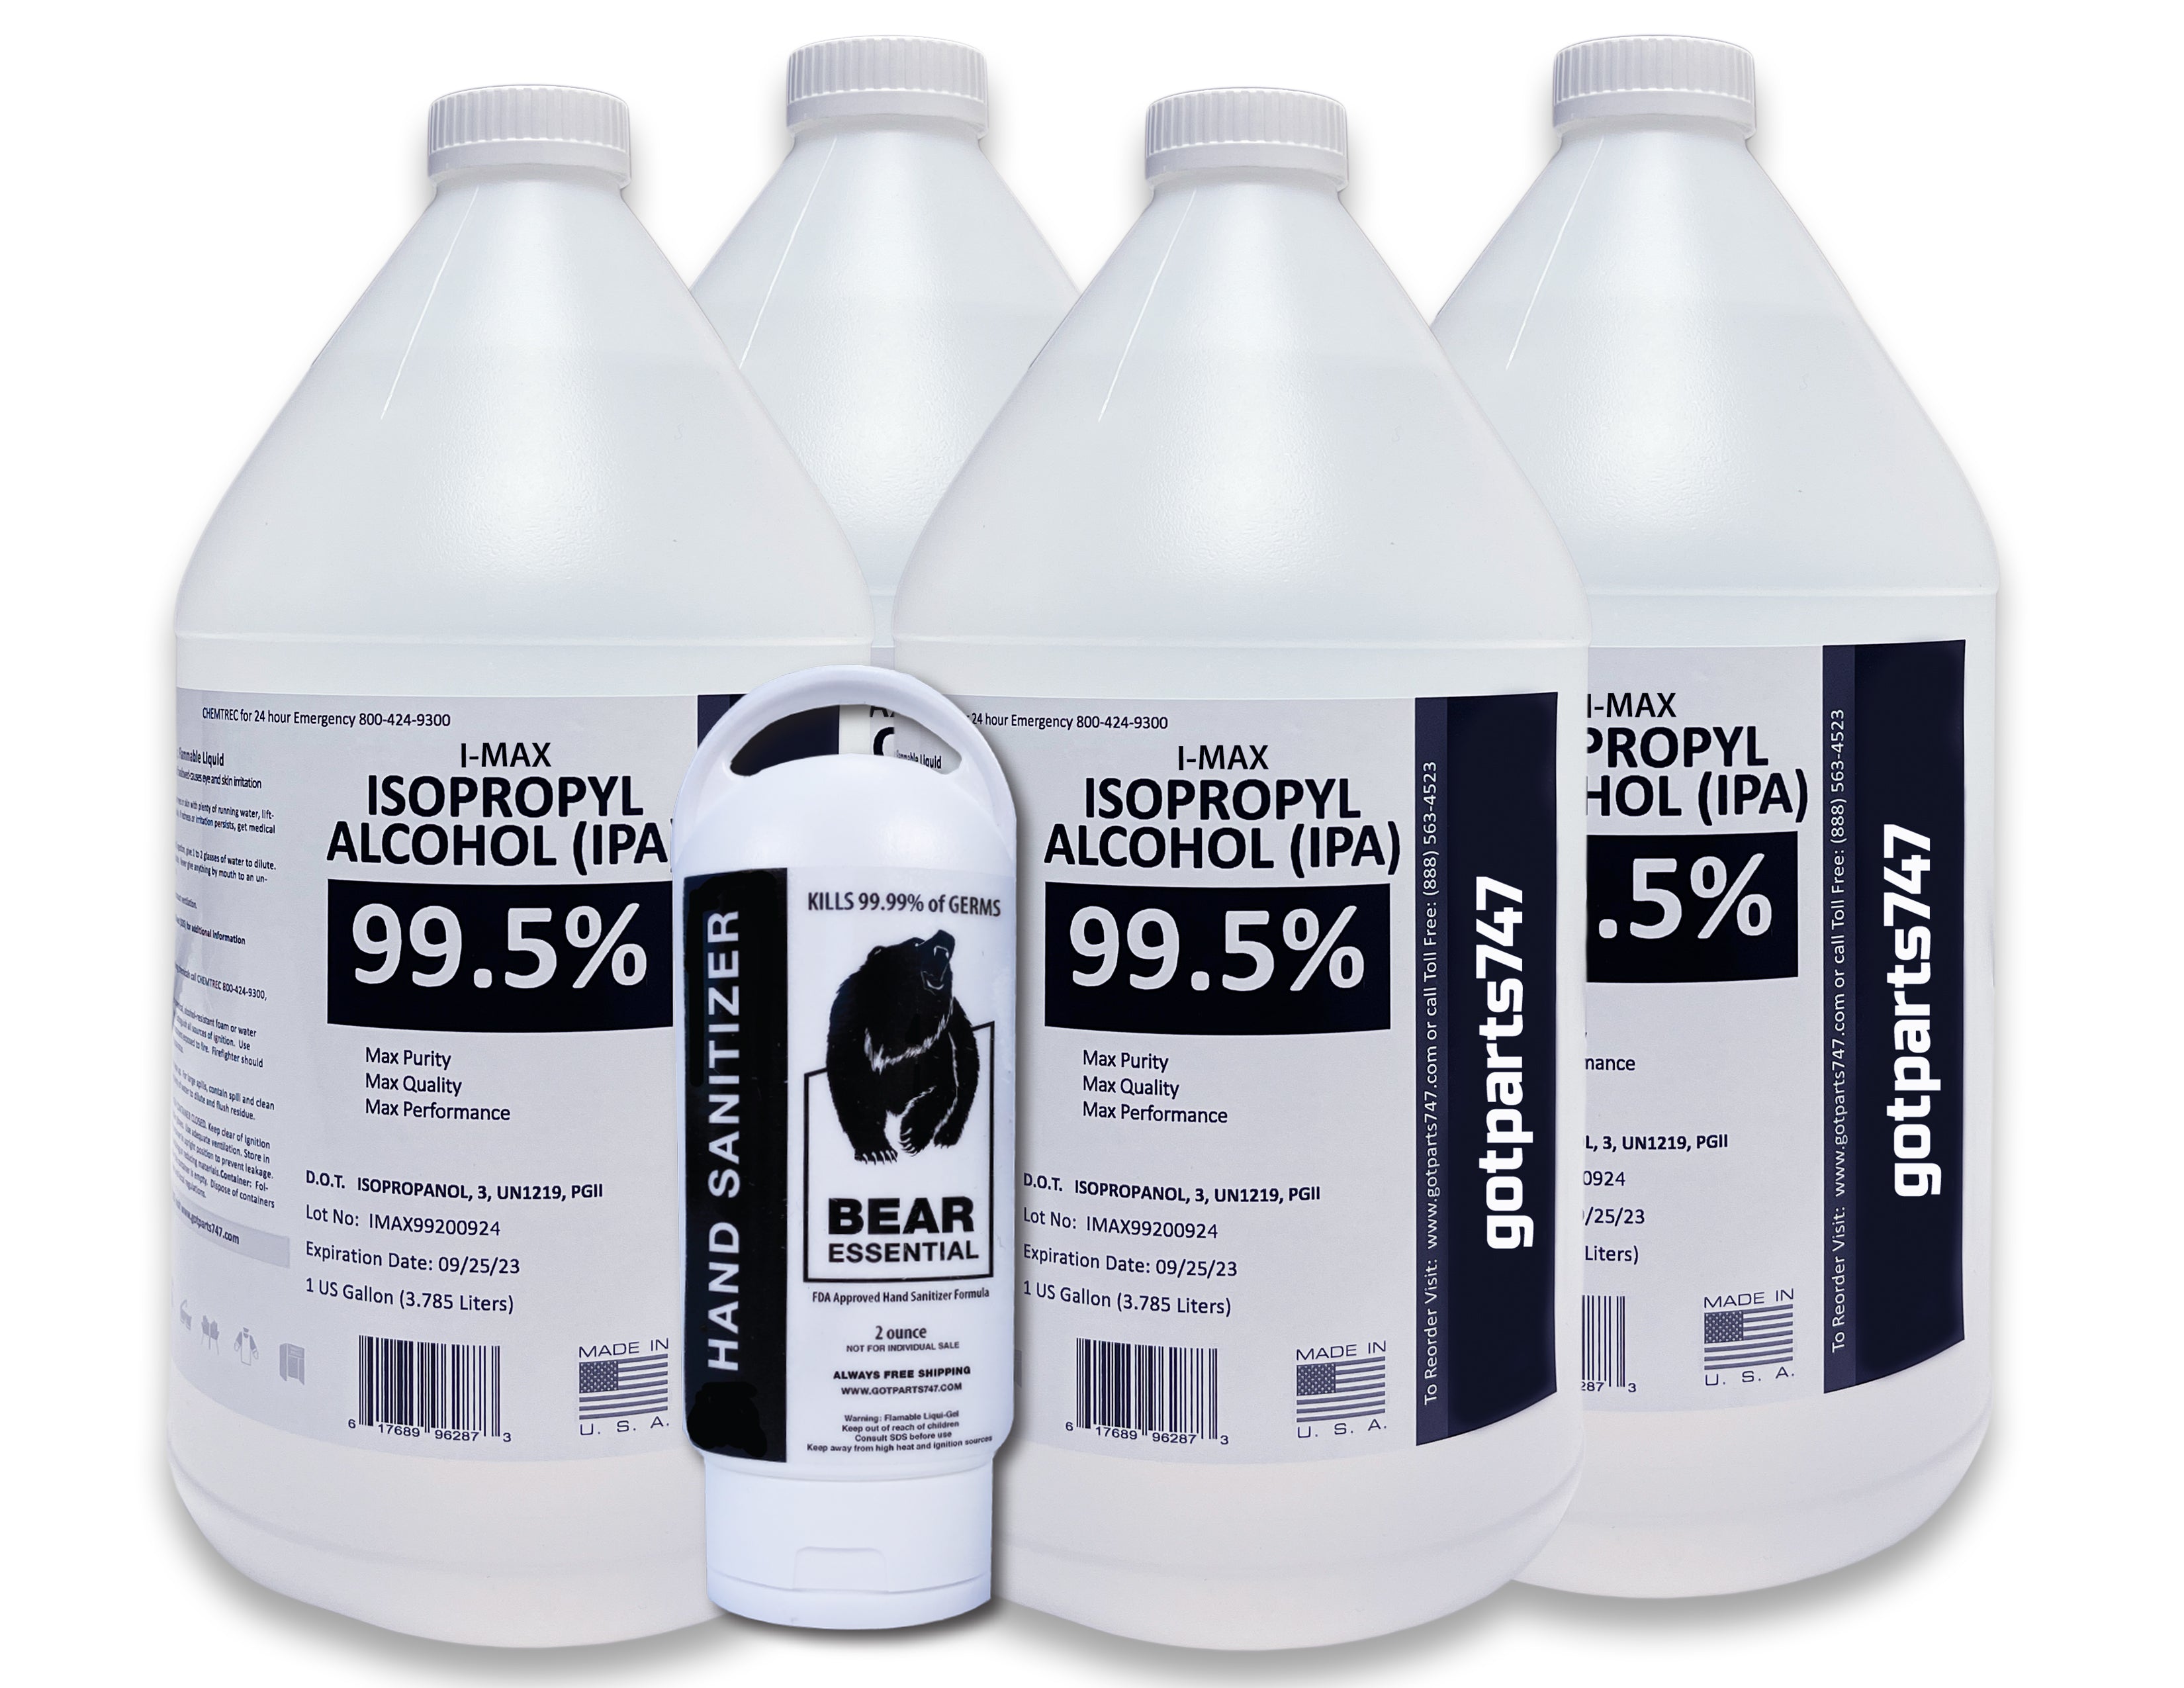 99.9% Purity Isopropanol - 1 Gallon for Solvent Cleaning and